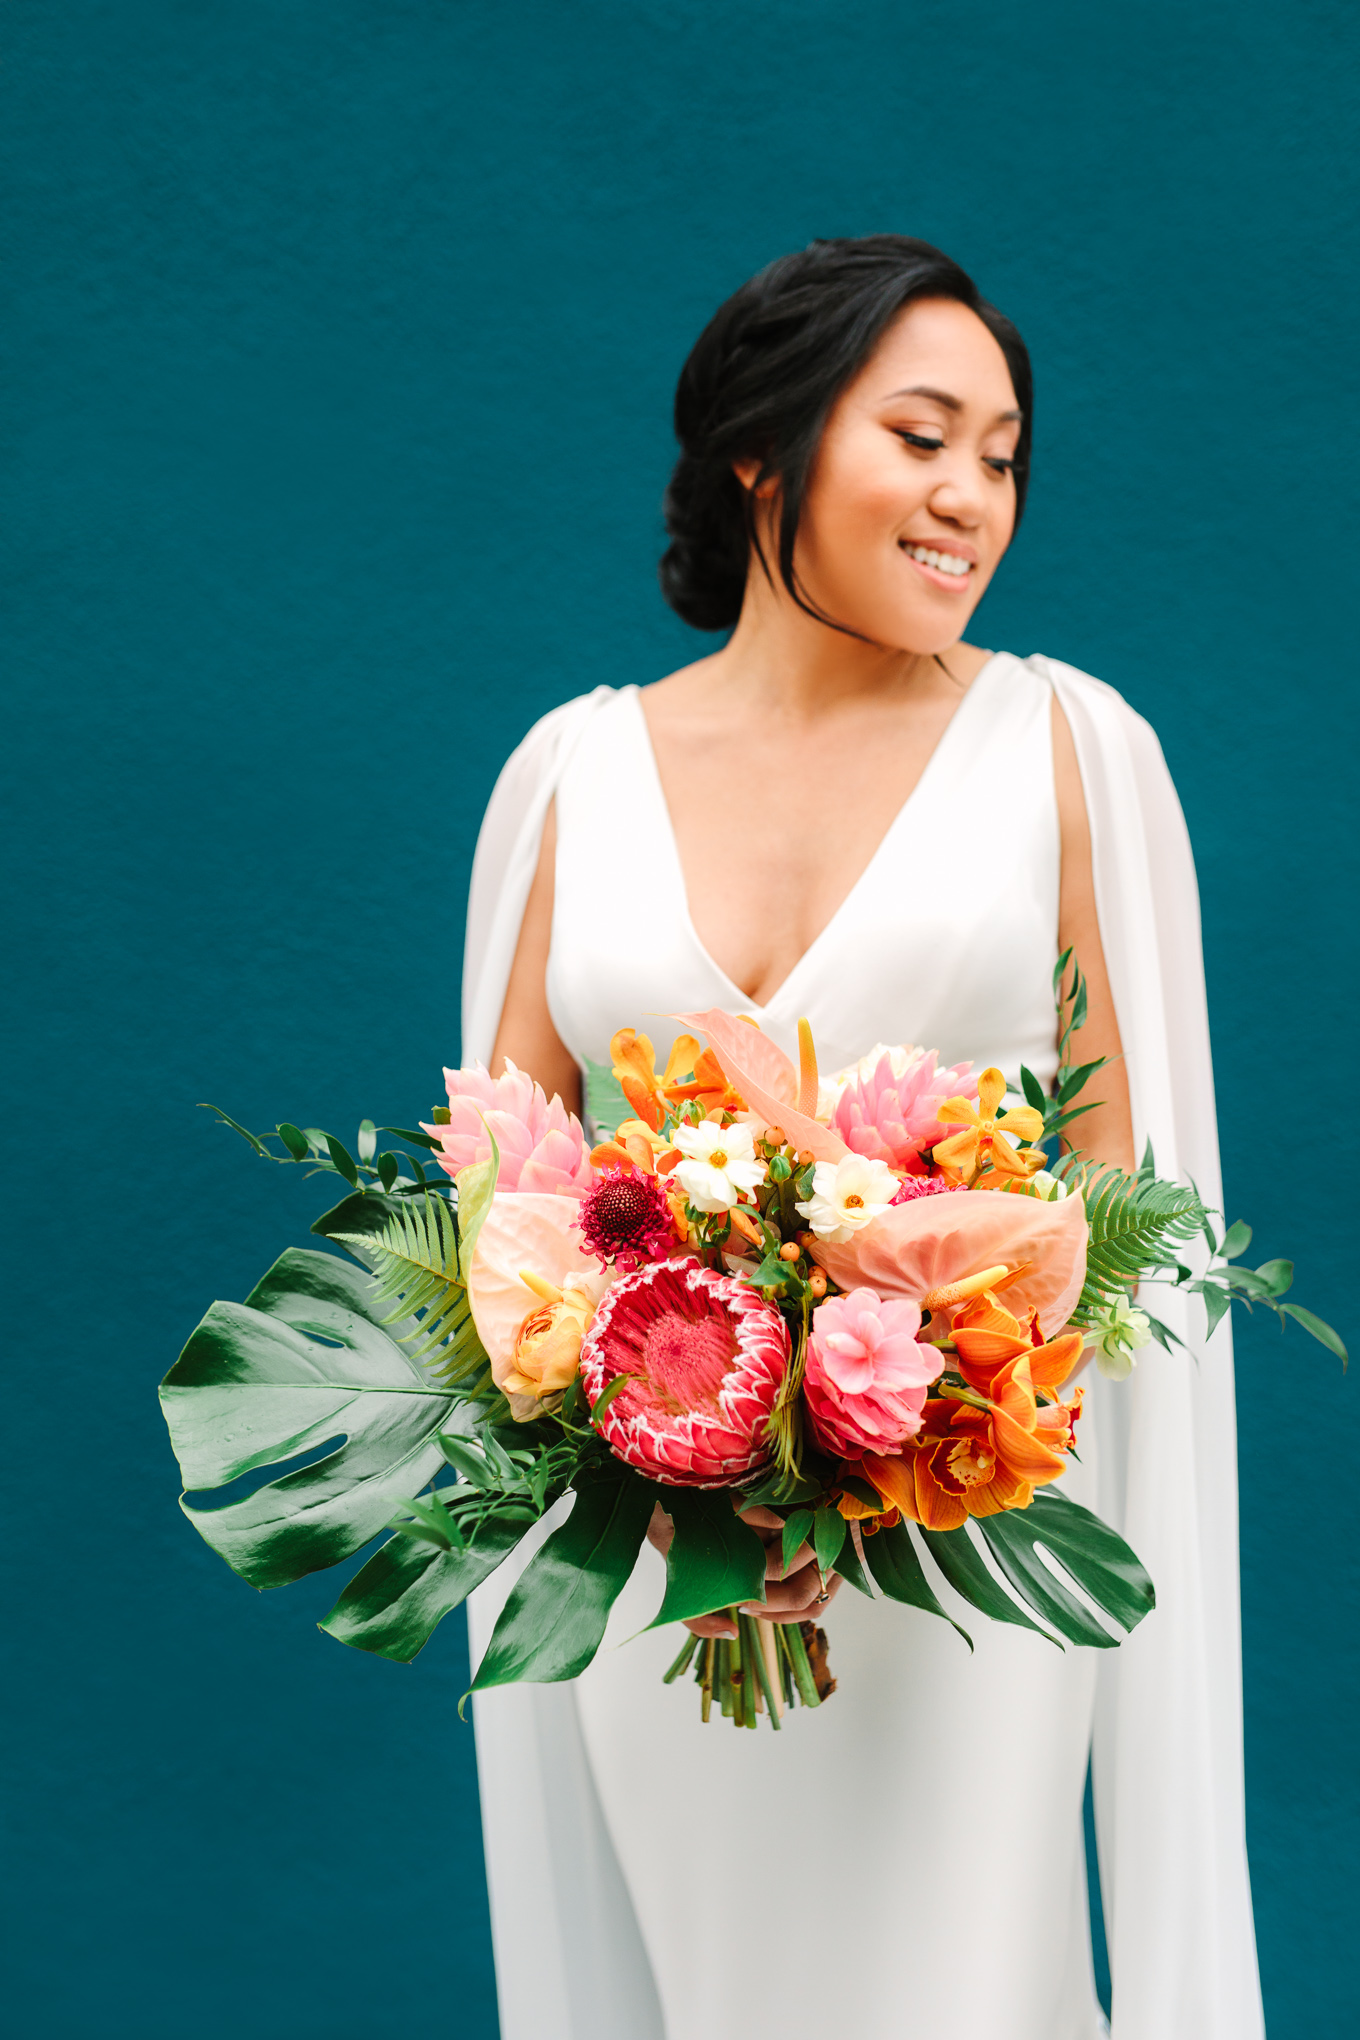 Tropical lush pink bouquet at The Fig House | Beautiful bridal bouquet inspiration and advice | Colorful and elevated wedding photography for fun-loving couples in Southern California | #weddingflowers #weddingbouquet #bridebouquet #bouquetideas #uniquebouquet   Source: Mary Costa Photography | Los Angeles